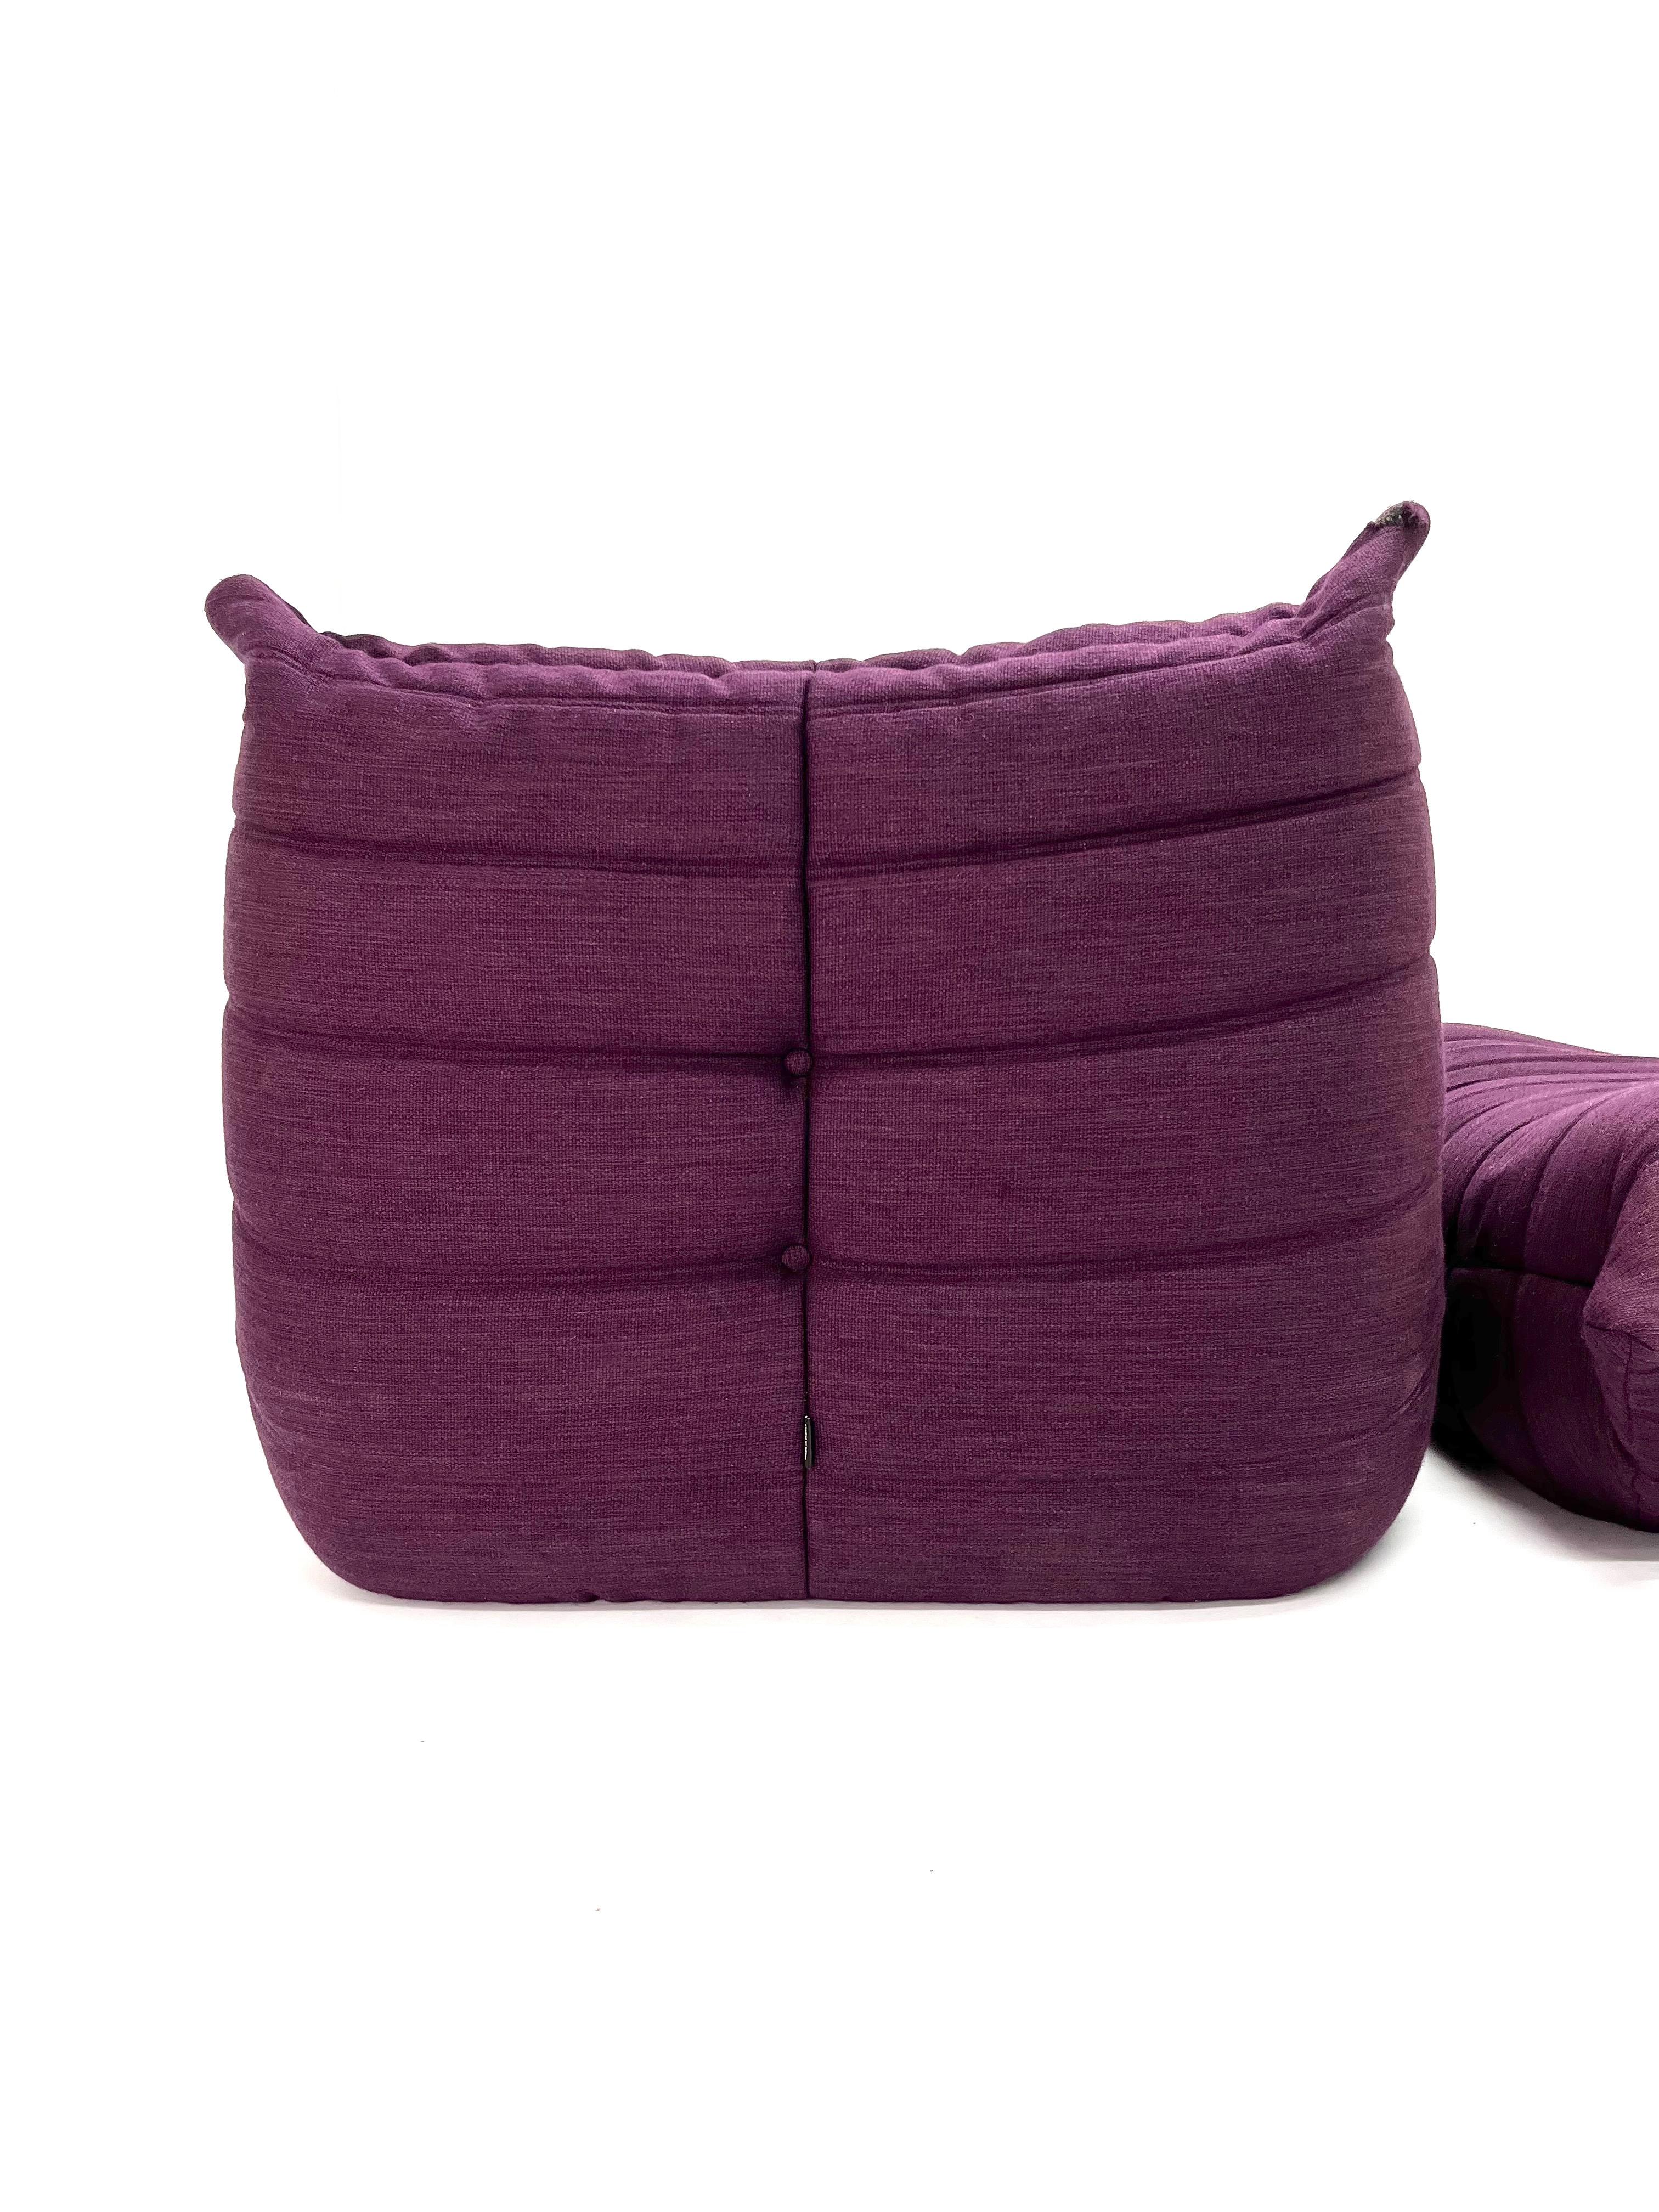 Togo Chair and Ottoman in Purple by Michel Ducaroy for Ligne Roset For Sale 8